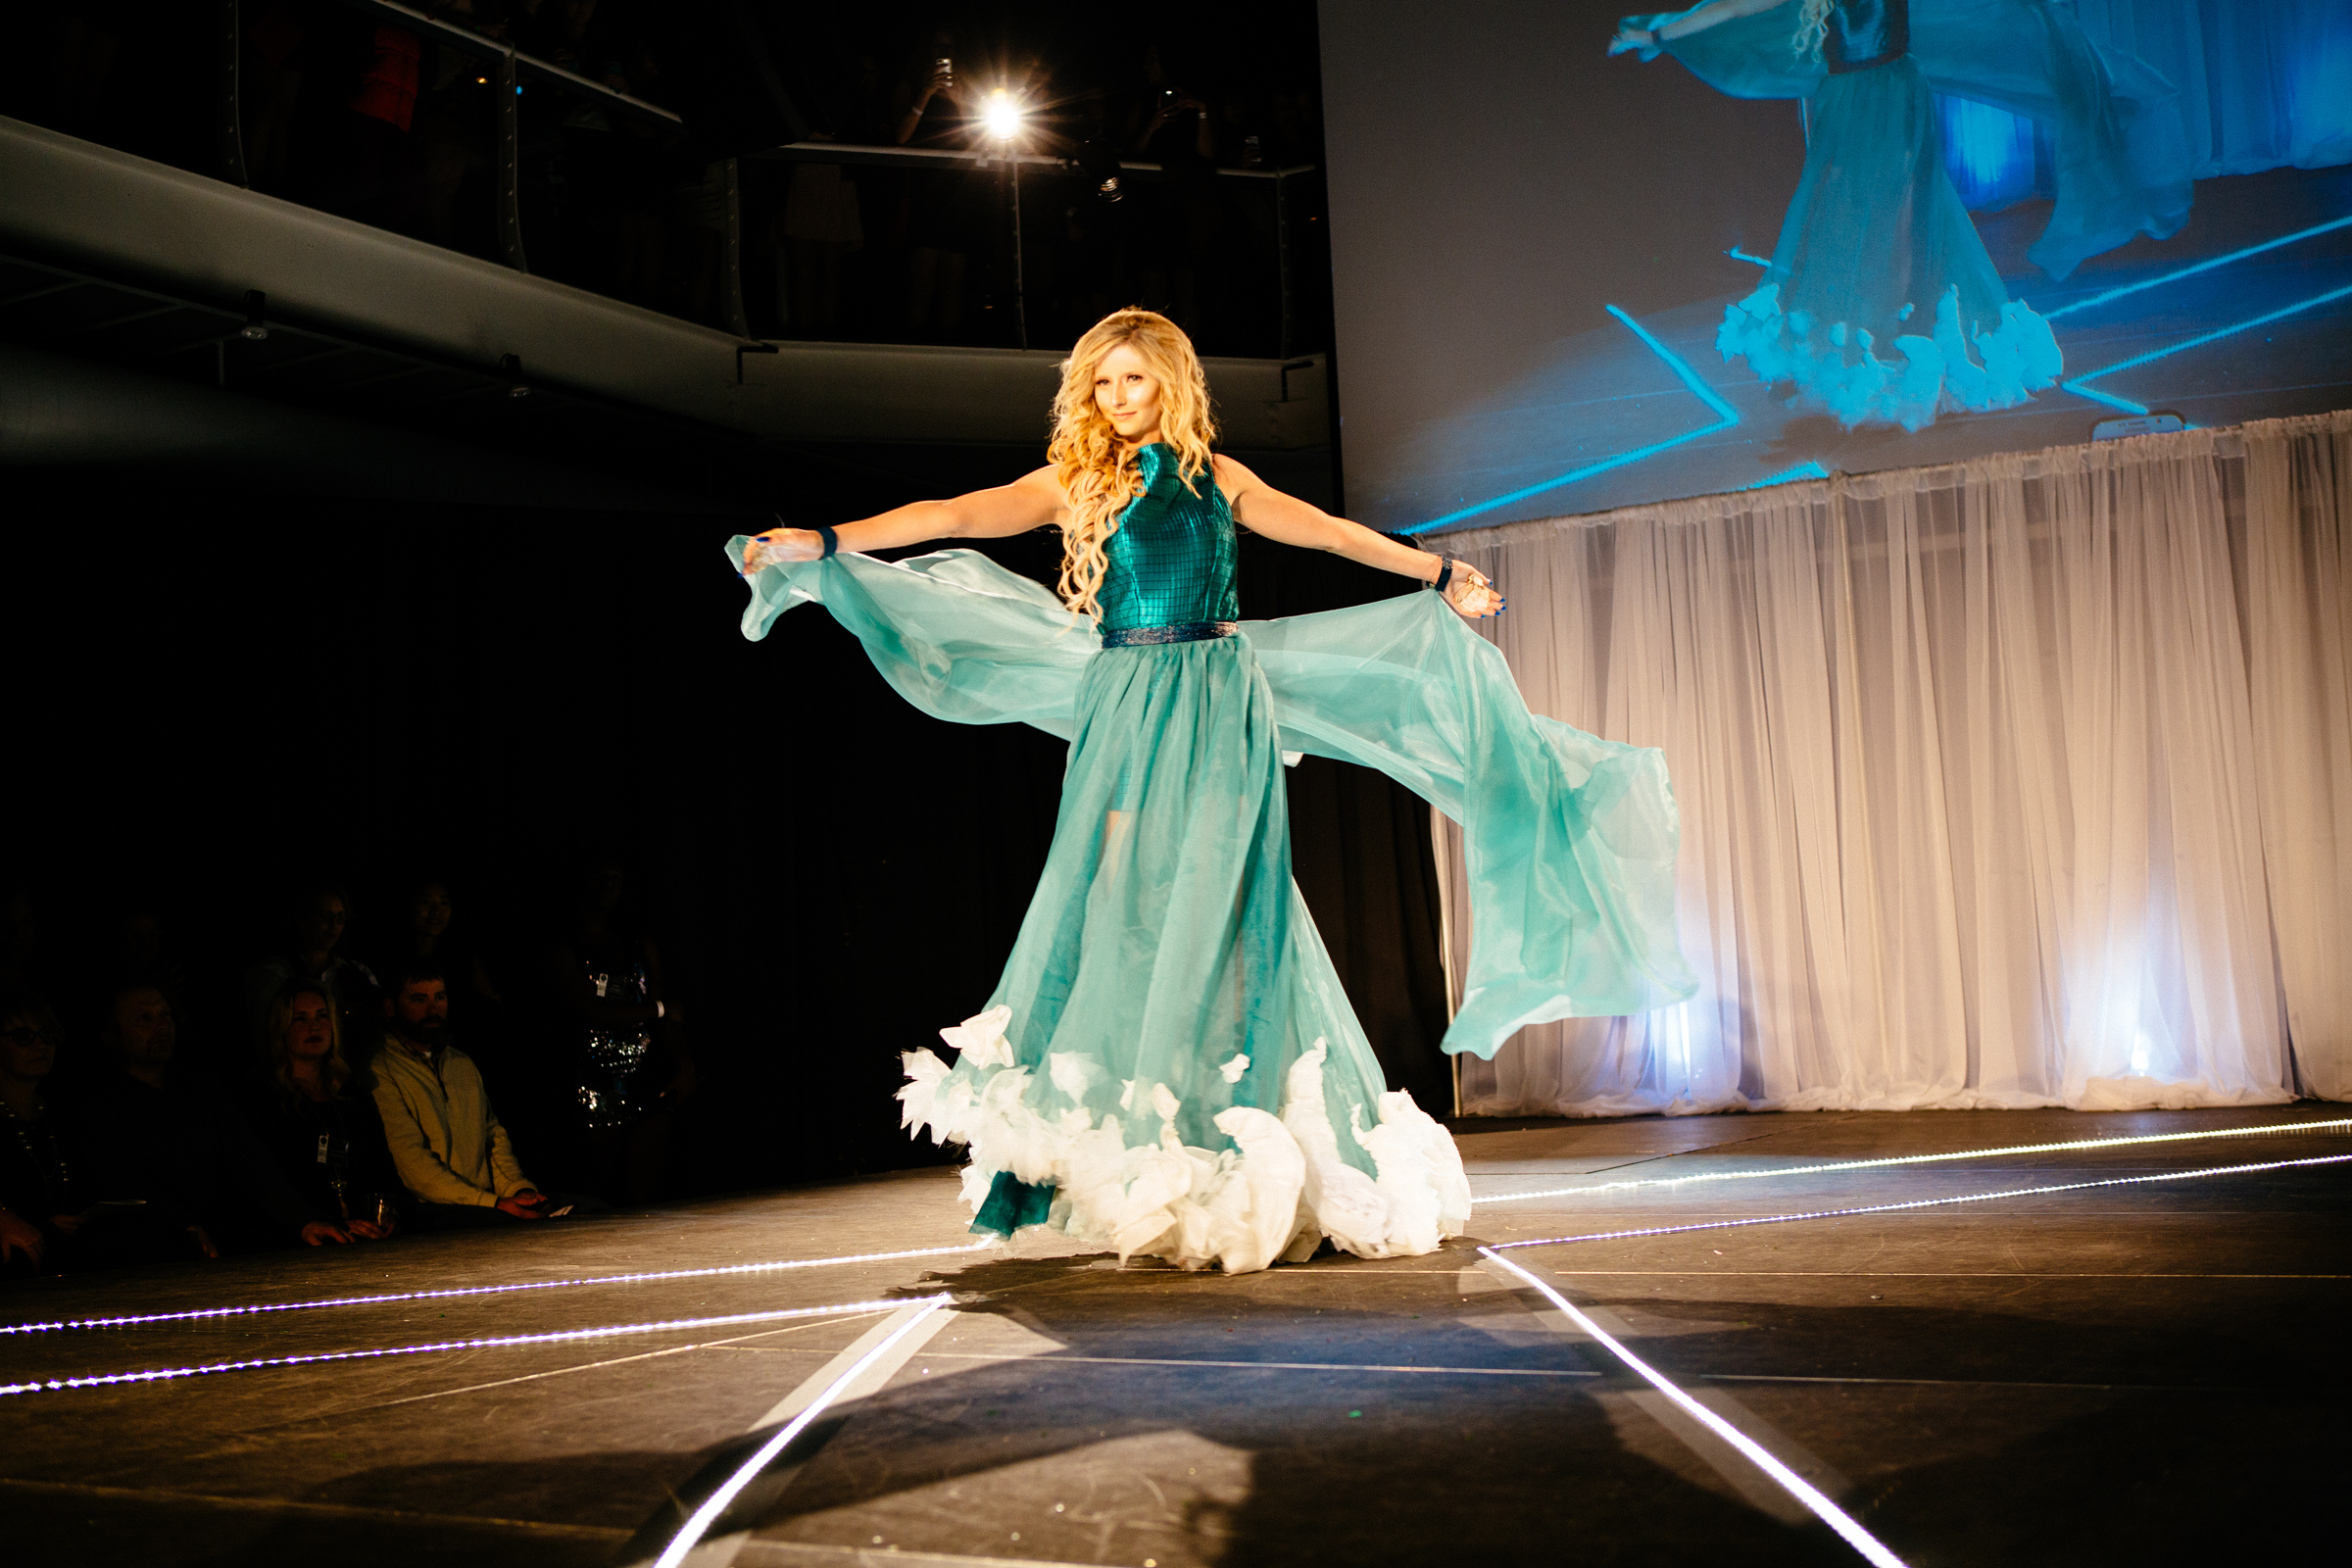 NewStudio Architecture's entry featured a flowing cape and wave-inspired hemline for the IIDA Fusion + Fashion runway show